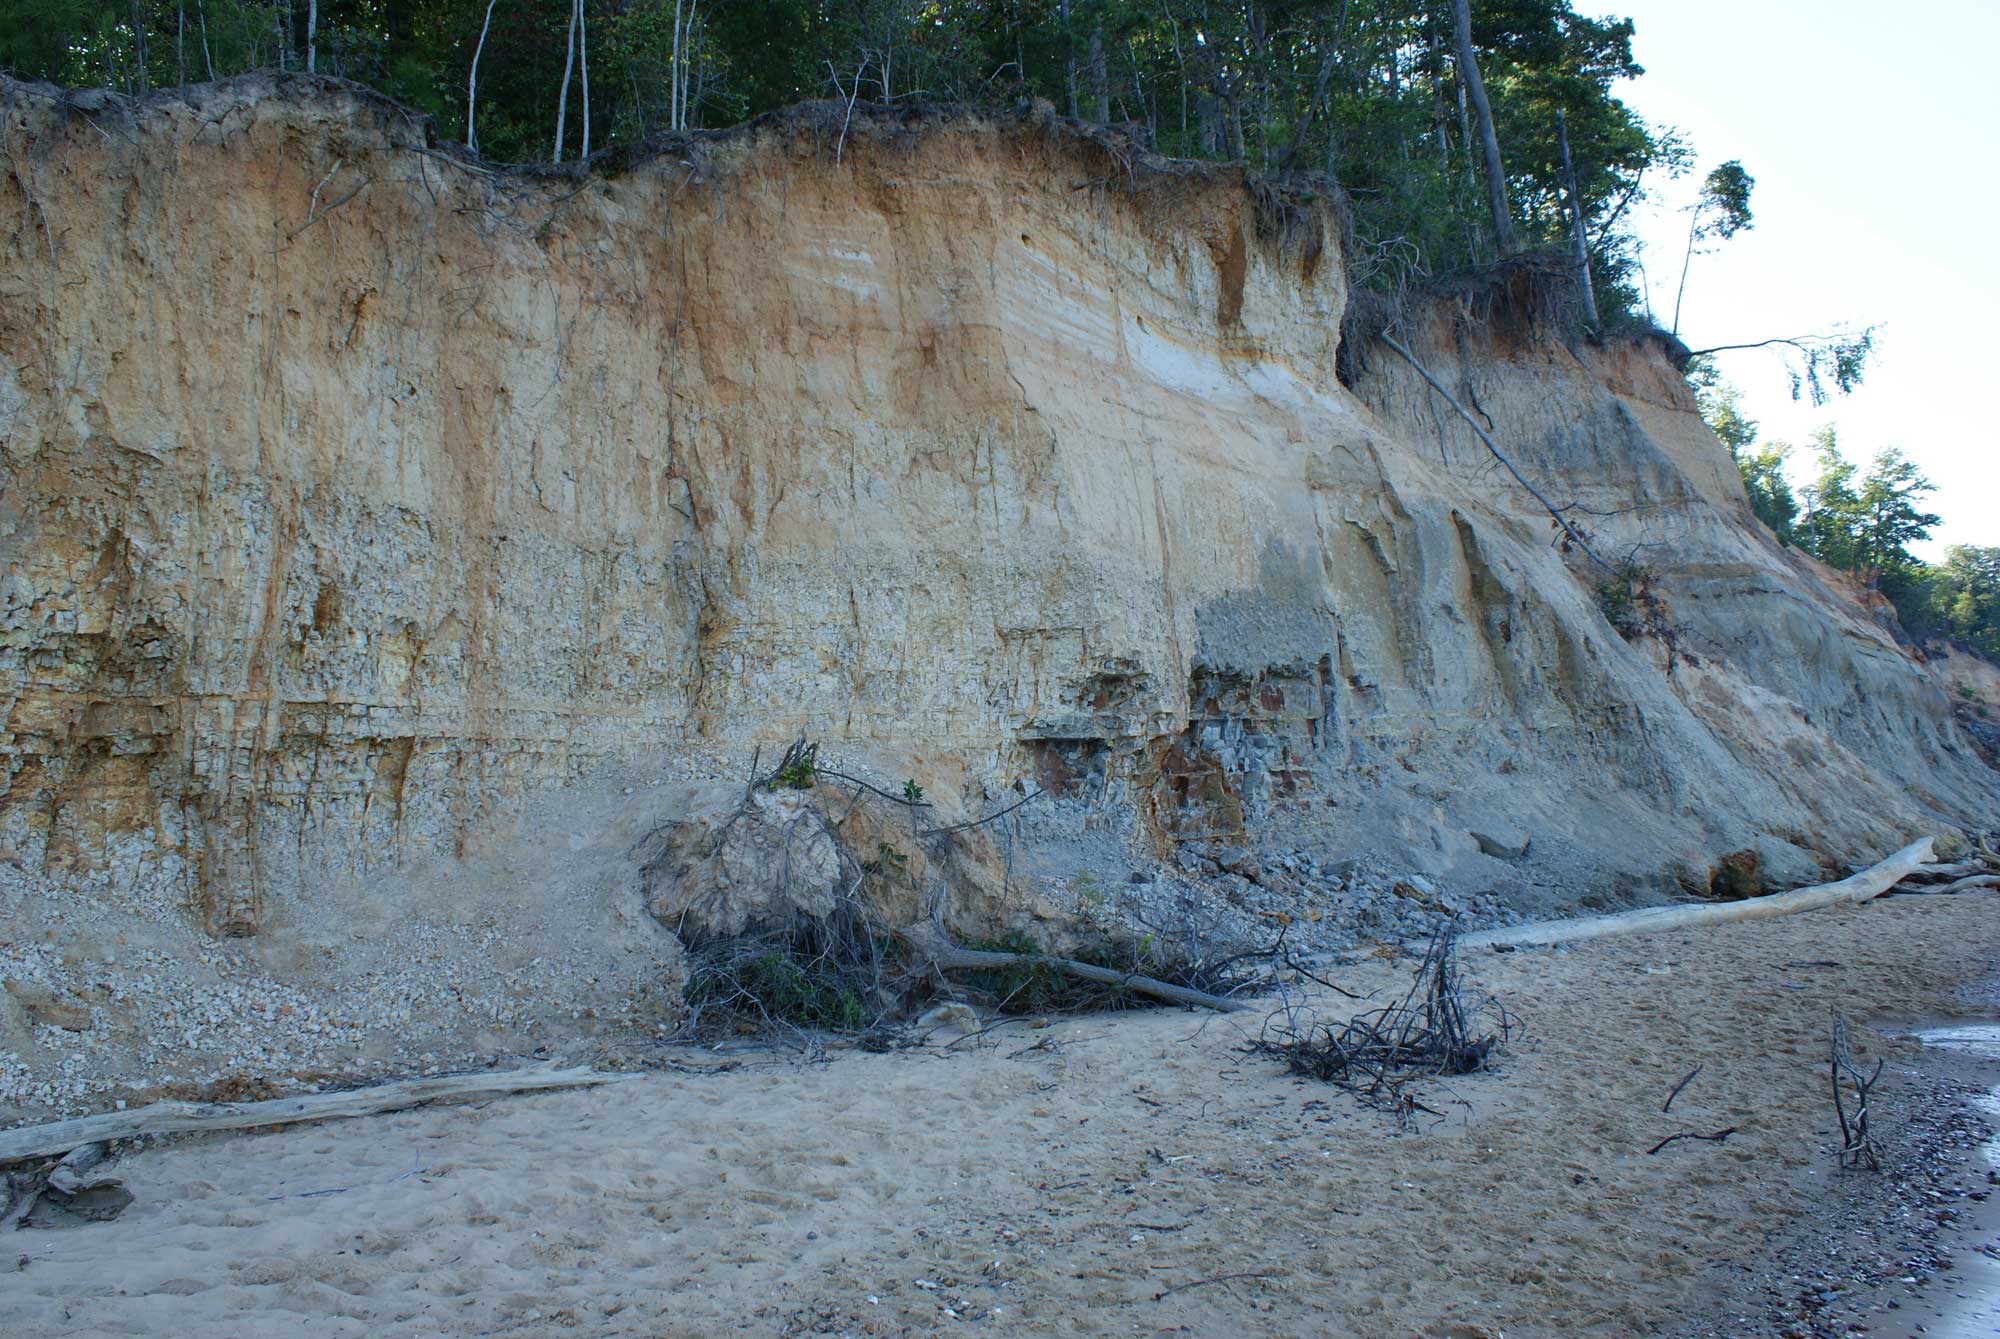 Photograph of Calvert Cliffs at Calvert Cliffs State Park in Maryland. The photo shows beachside cliffs with trees on top.